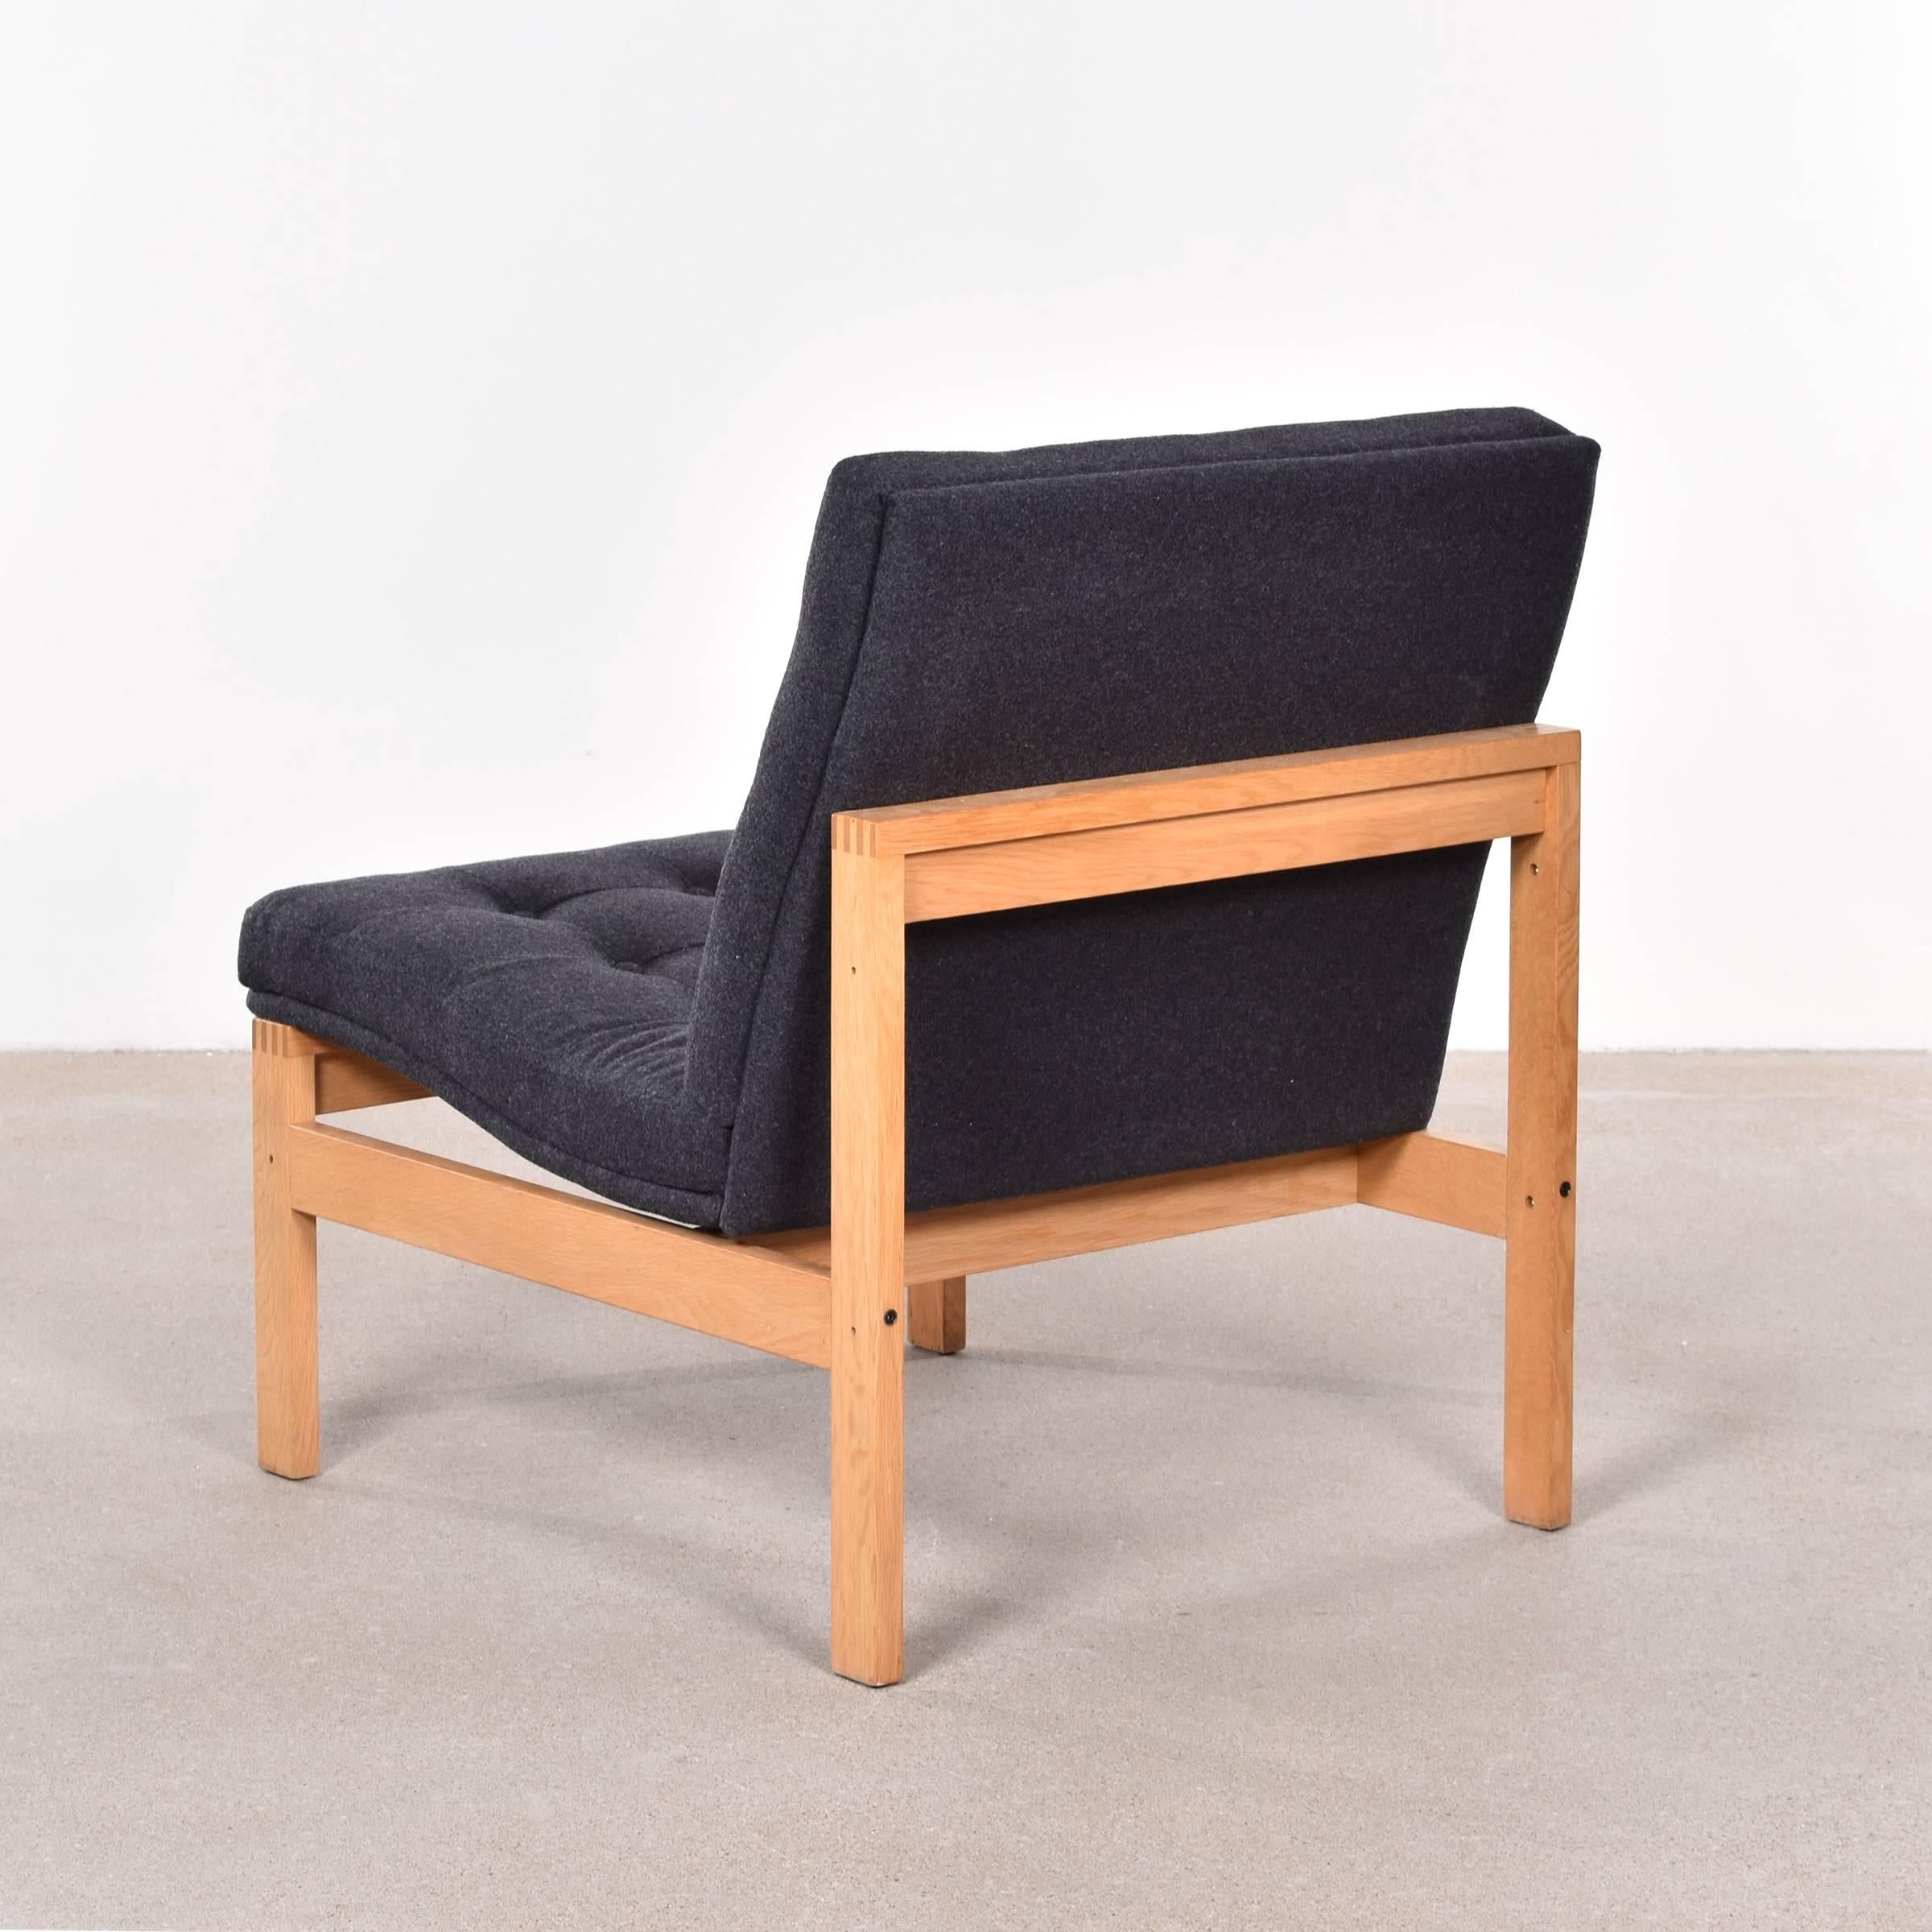 Stylish easy chair by Ole Gjerløv-Knudsen and Torben Lind for France & Son Denmark. Very good condition with oak frame and new dark grey/charcoal wool upholstery. Signed with manufacturer's mark.

Free shipping for European destinations!

We